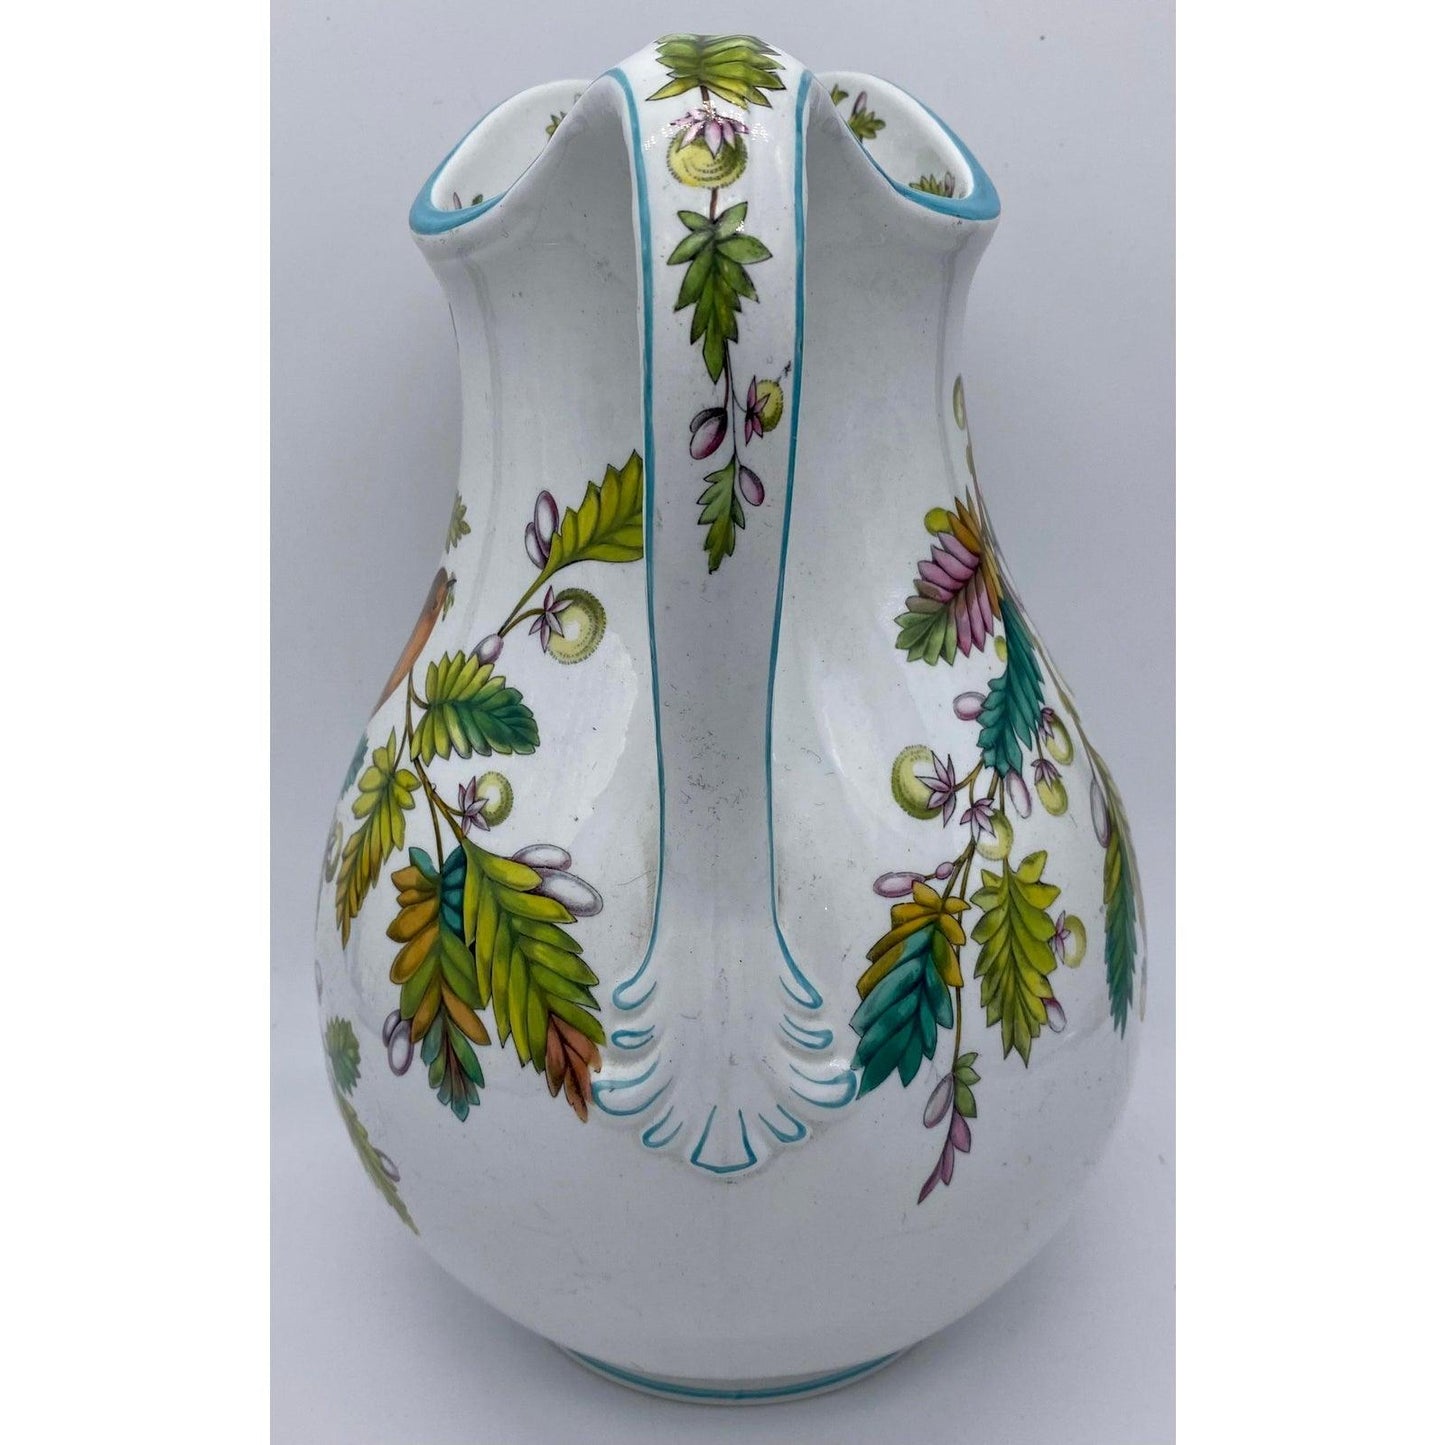 Antique English Water Jug in the Avis Pattern With Birds & Foliage, 19th Century - The White Barn Antiques